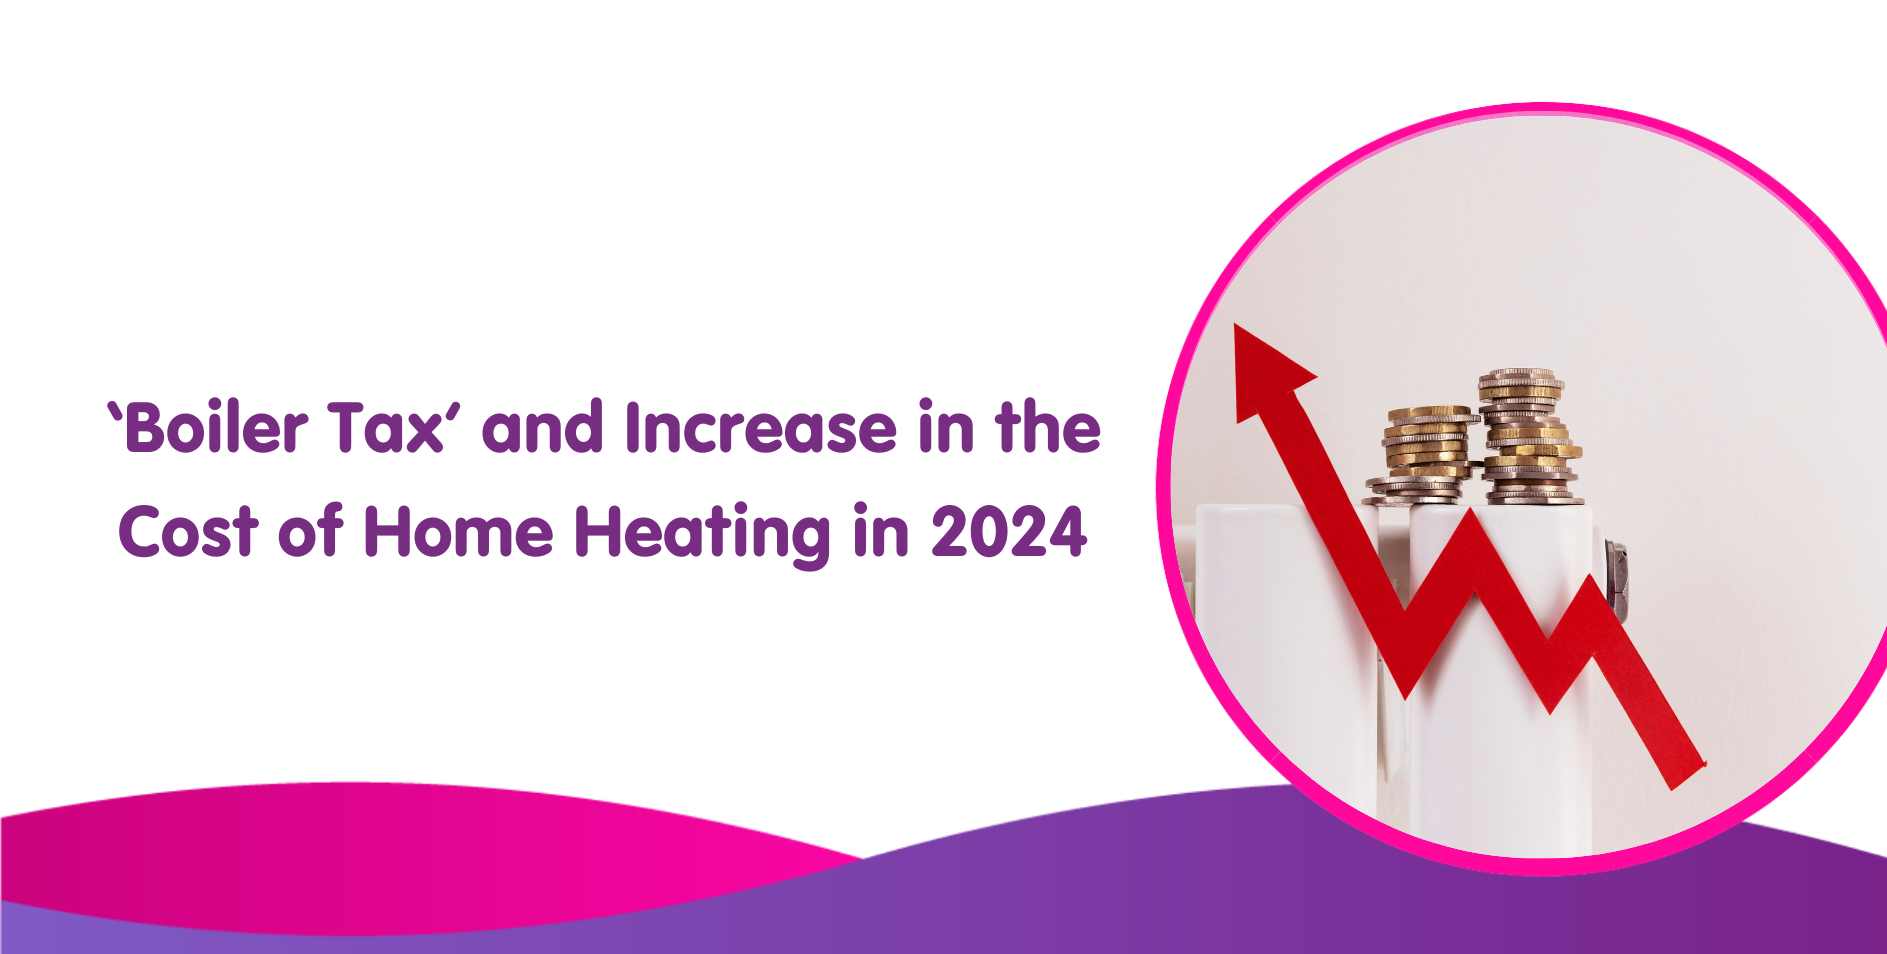 Boiler Tax 2024 and Rising Costs of Home Heating from the CHMM